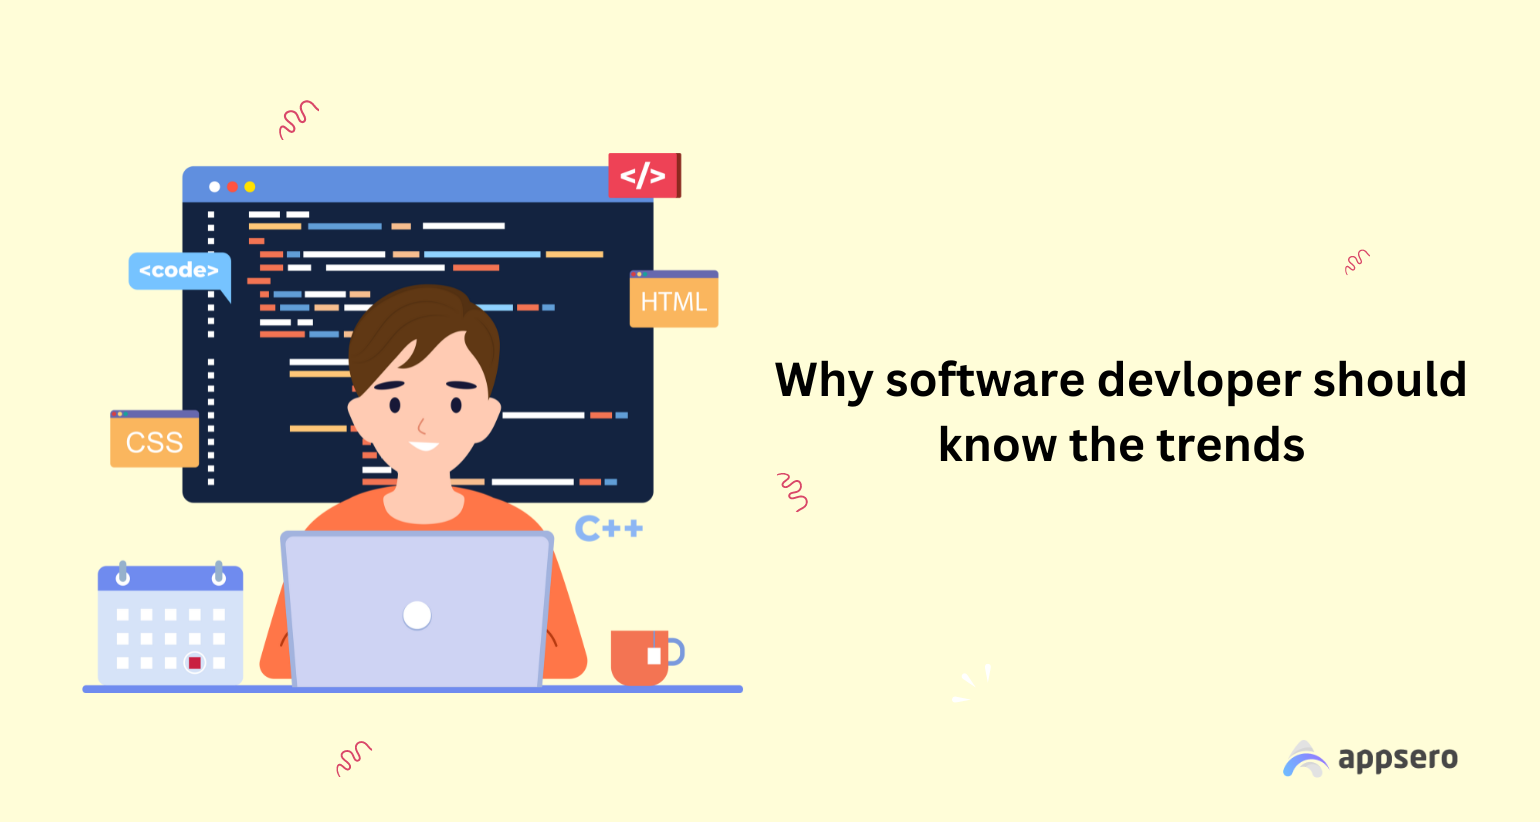 Why software developers should know the web development trends